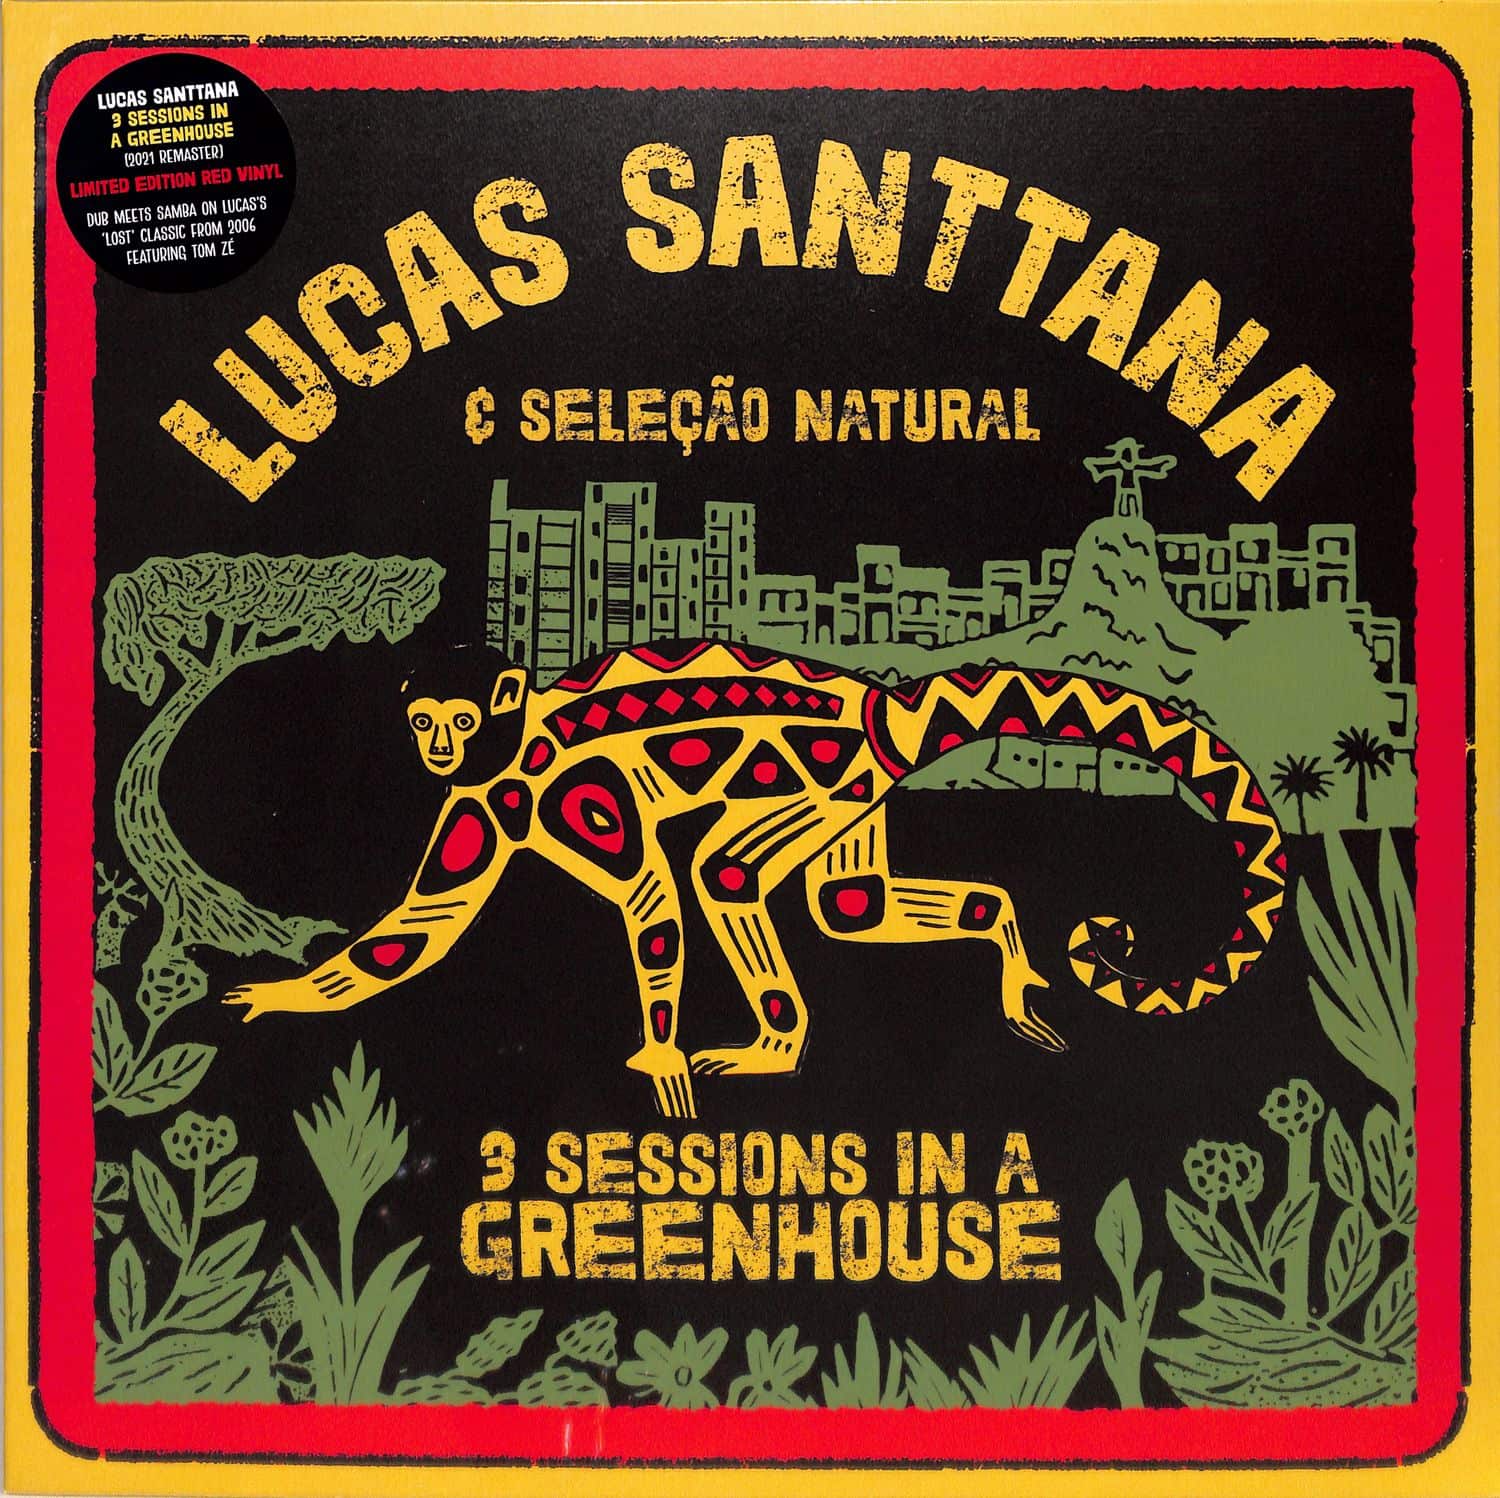 Lucas Santtana - 3 SESSIONS IN A GREENHOUSE 